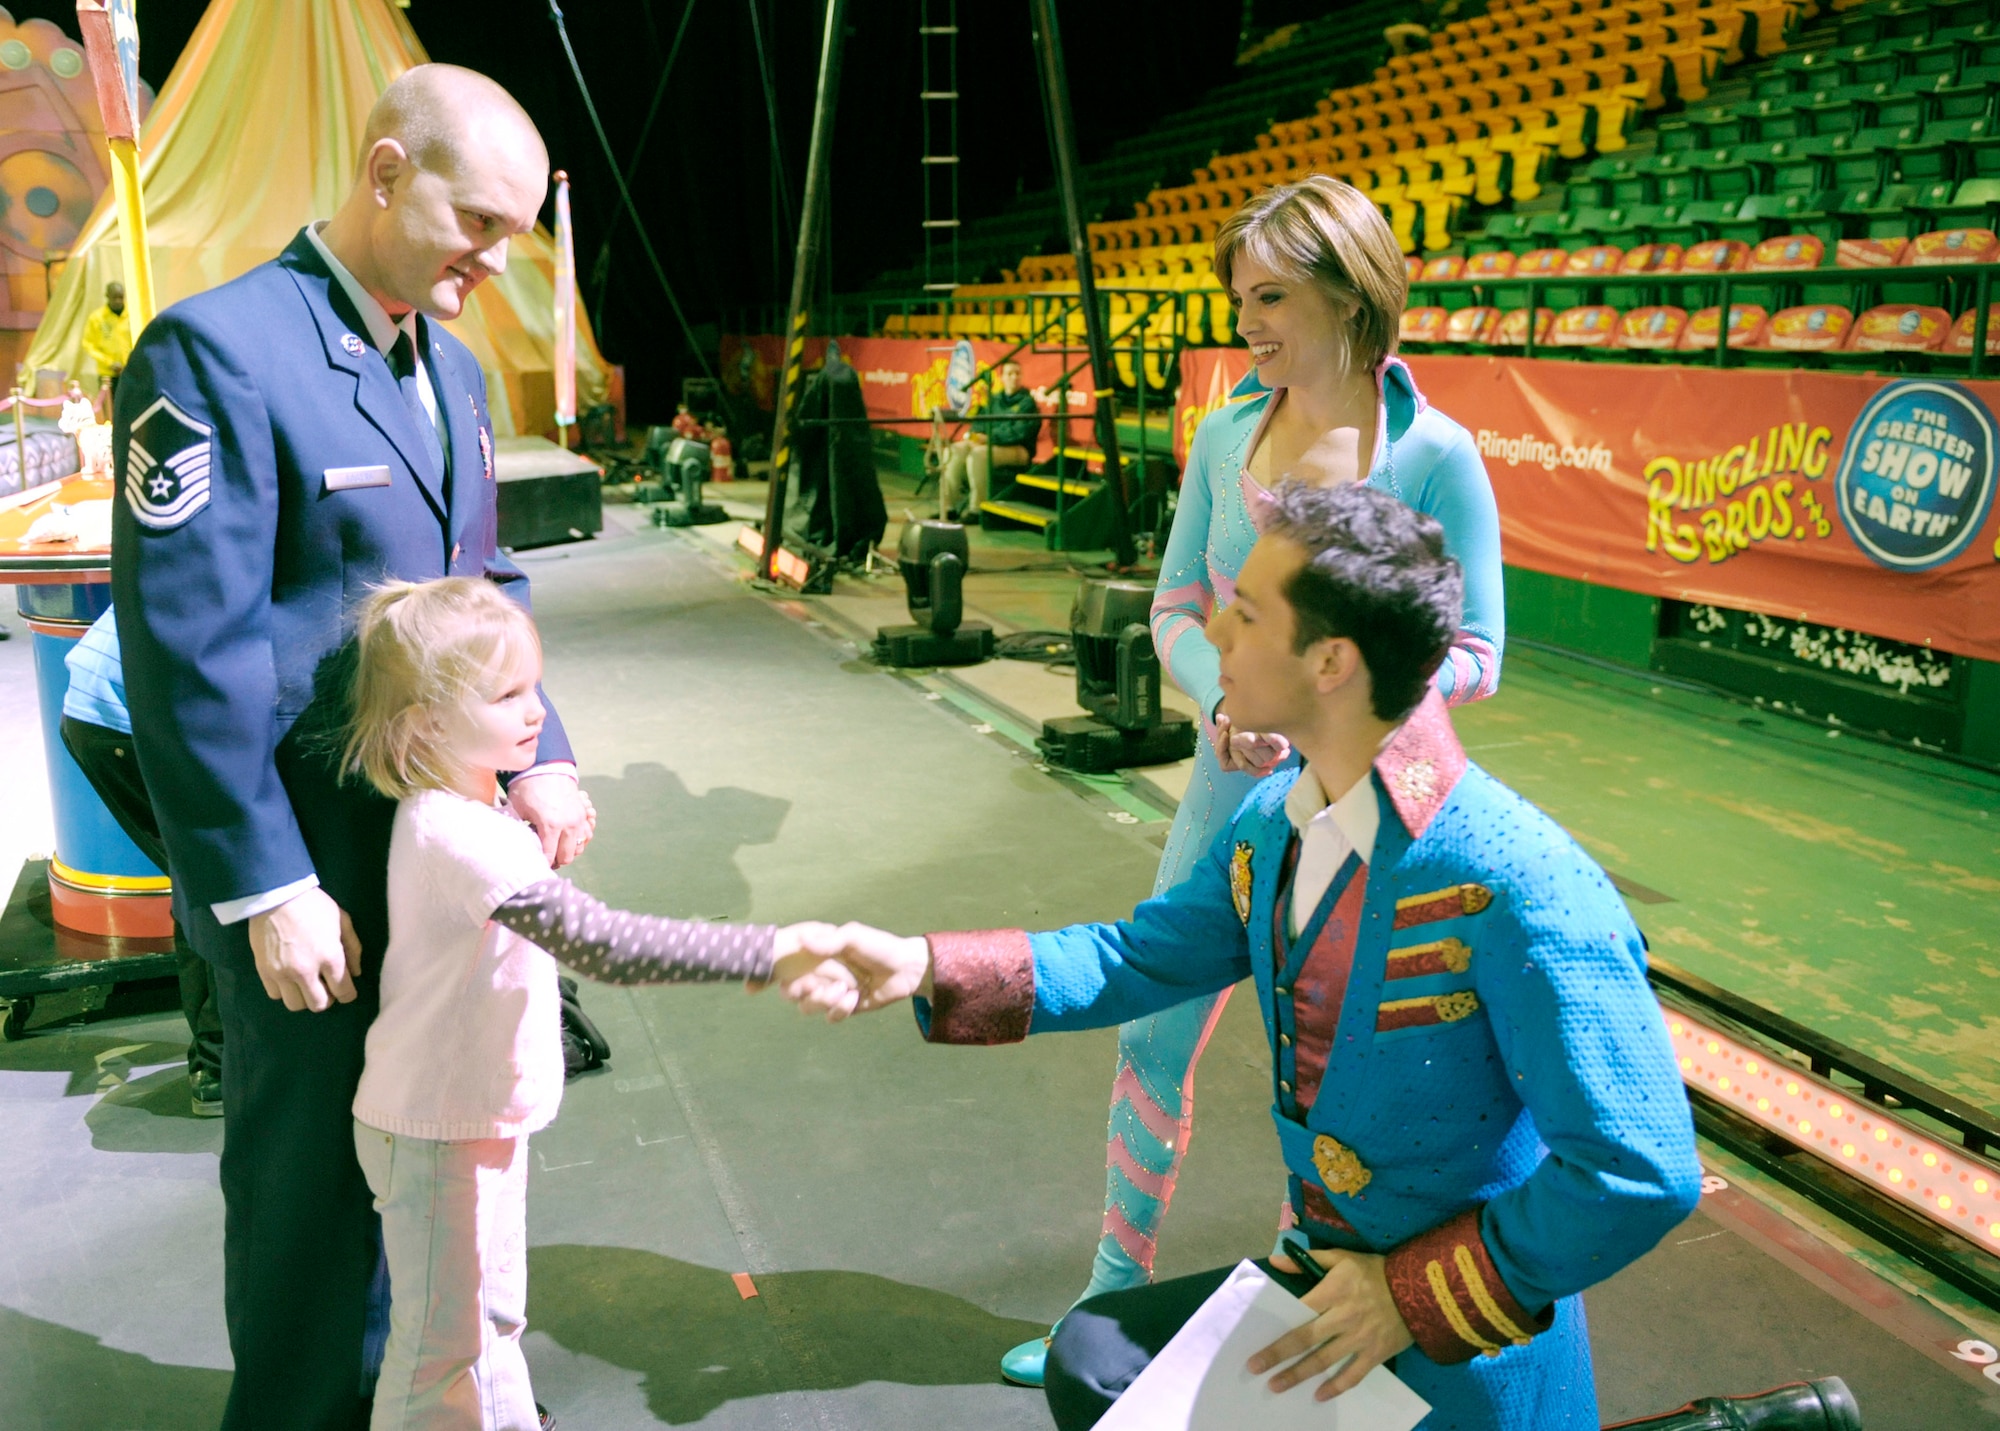 Master Sgt. Cameron Rogers looks on as his 5-year-old daughter Laine shakes hands with Magical Zingmaster Alex Ramon prior to the start of the Ringling Bros. and Barnum & Bailey "Zing Zang Zoom" circus performance March 26, 2010, at George Mason University's Patriot Center in Fairfax, Va.  Looking on is the circus' human cannonball and former Air Force reservist Tina Miser. Sergeant Rogers is the Air Force District of Washington's UH-1N helicopter program manager at Bolling Air Force Base, D.C. The Rogers family was asked to serve as guest circus ringmasters representing military families worldwide in observance of Year of the Air Force Family. (U.S. Air Force photo/Jim Varhegyi)